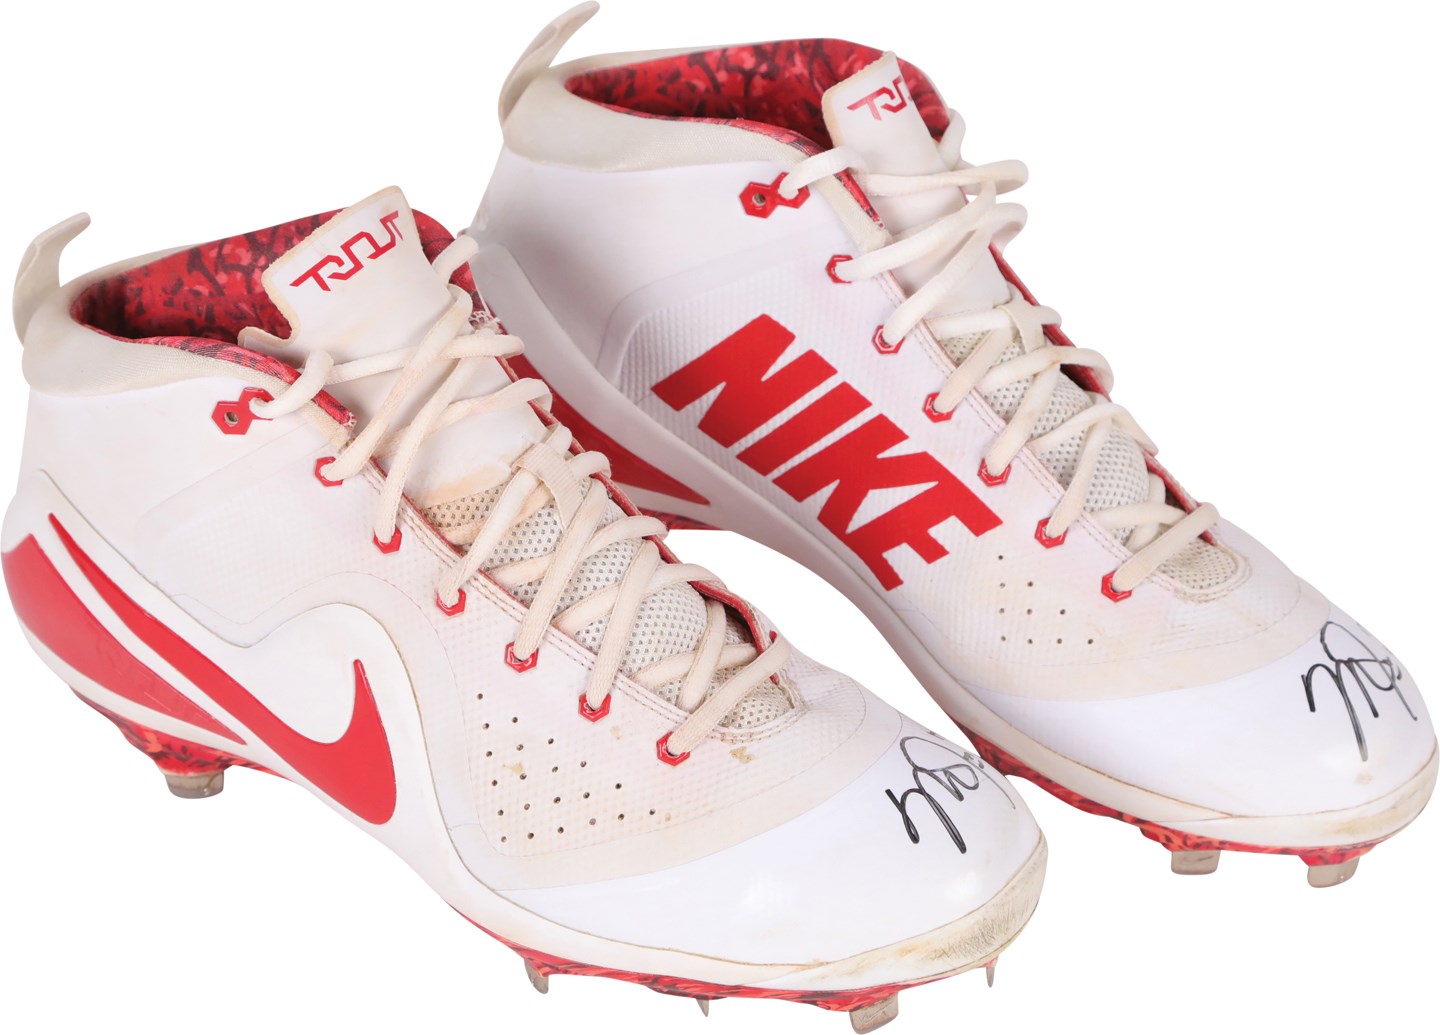 - 2017 Mike Trout Photo-Matched HR #197 Los Angeles Signed Game Worn Cleats (Anderson Authentic, Photo-Matched, JSA)